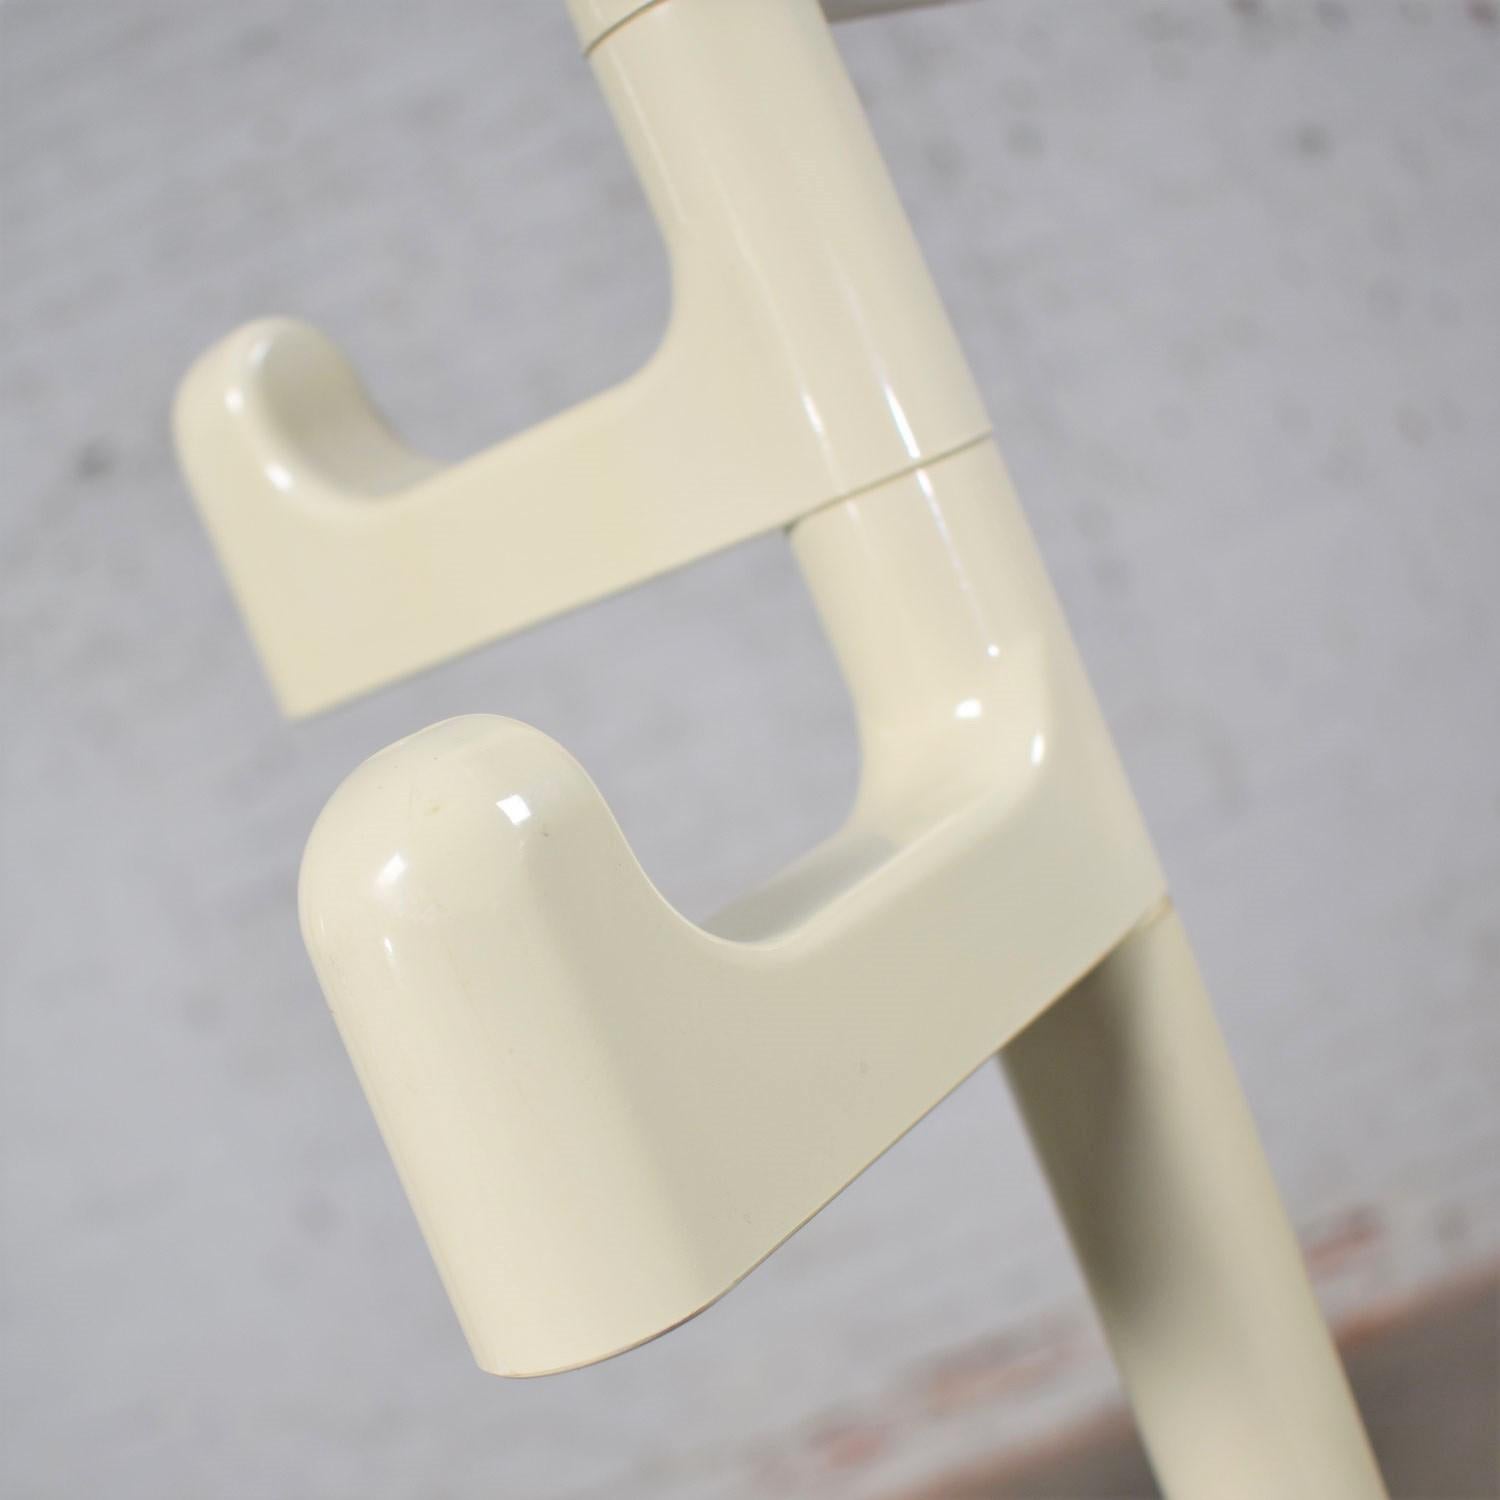 20th Century Modern Italian White Towel or Coat Rack by Makio Hasuike for Gedy